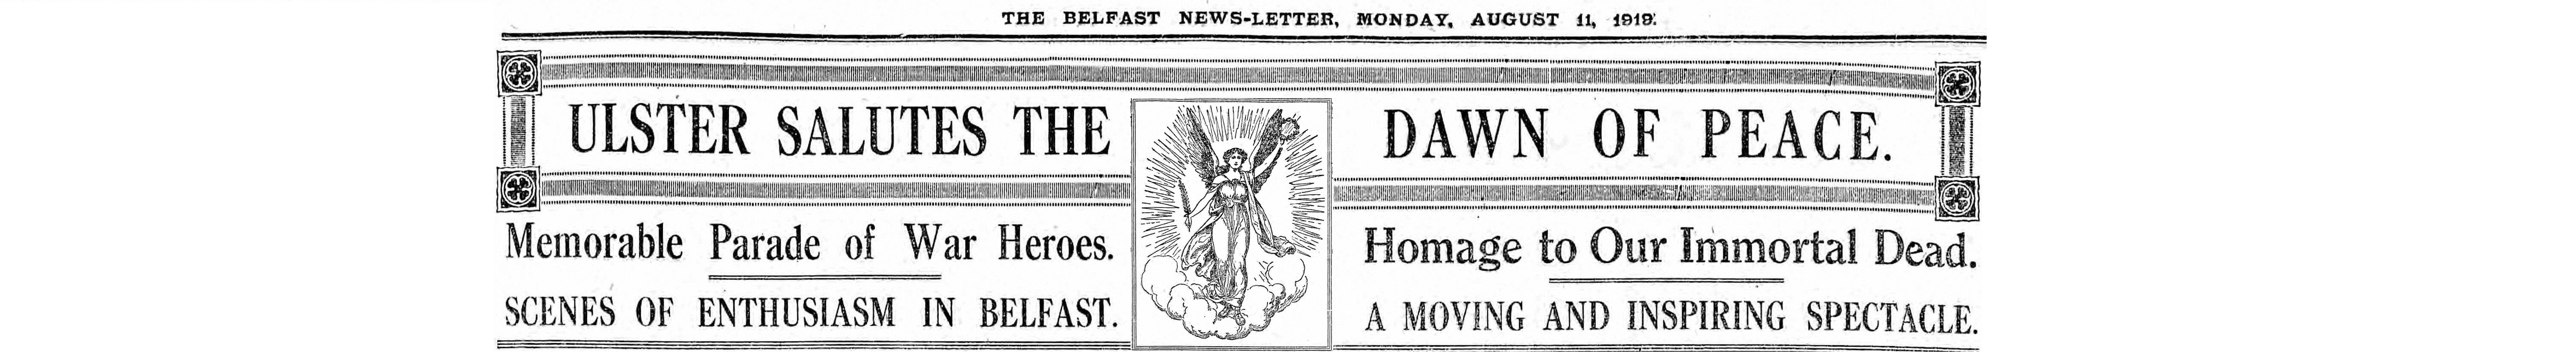 Ulster Salutes the Dawn of Peace (BNL 11-08-1919)